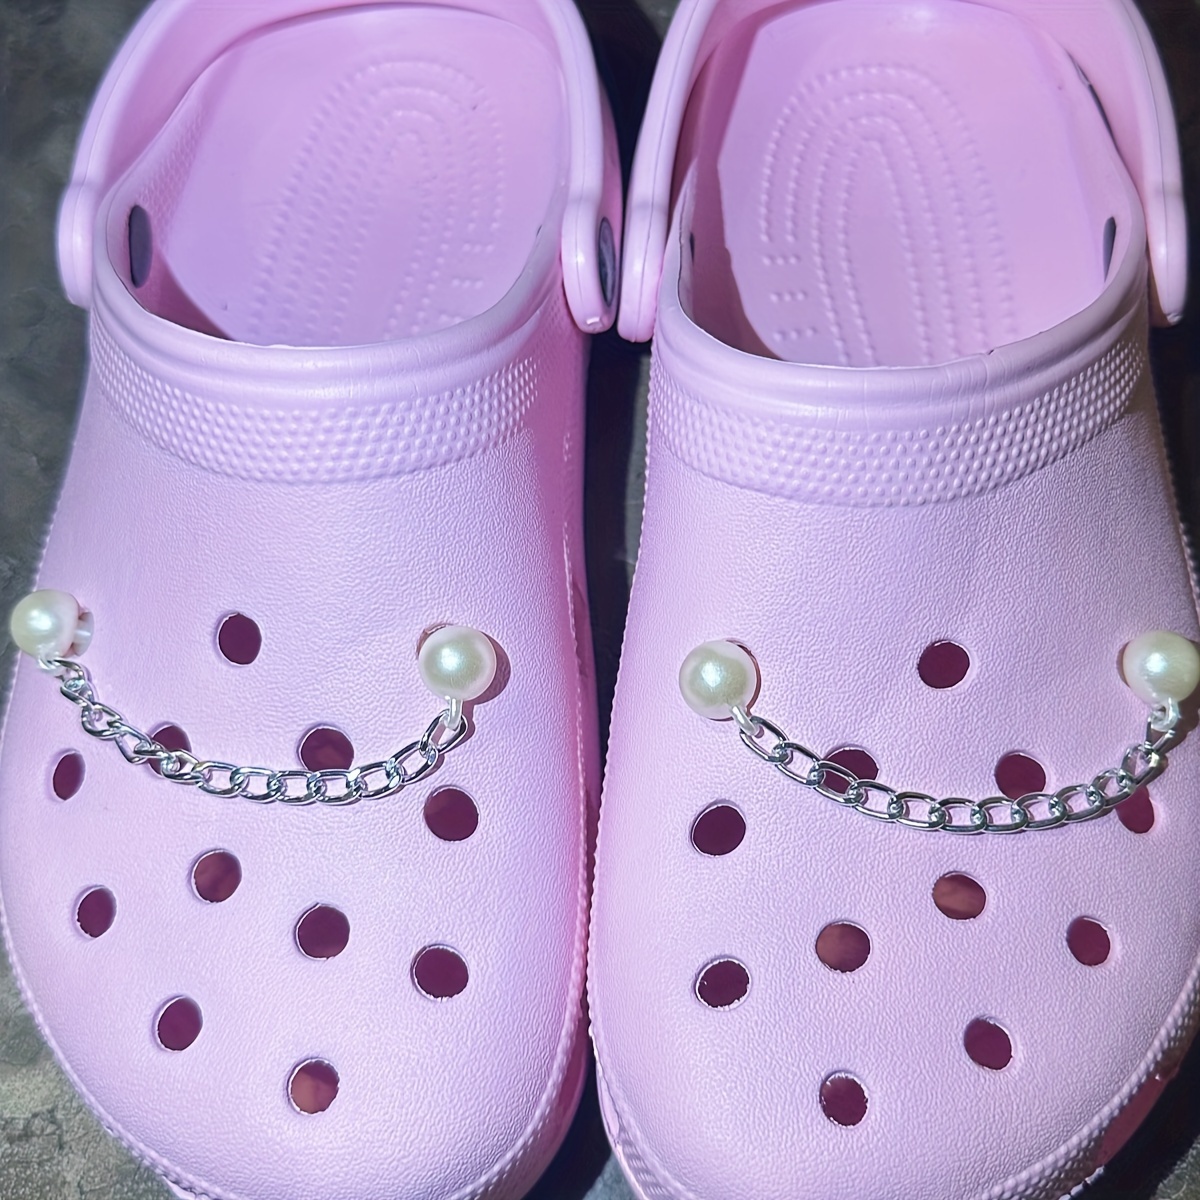 Crocs grey pink womens 9 mens 7 with charms flowers crystal 5 hearts pearl  shoes 